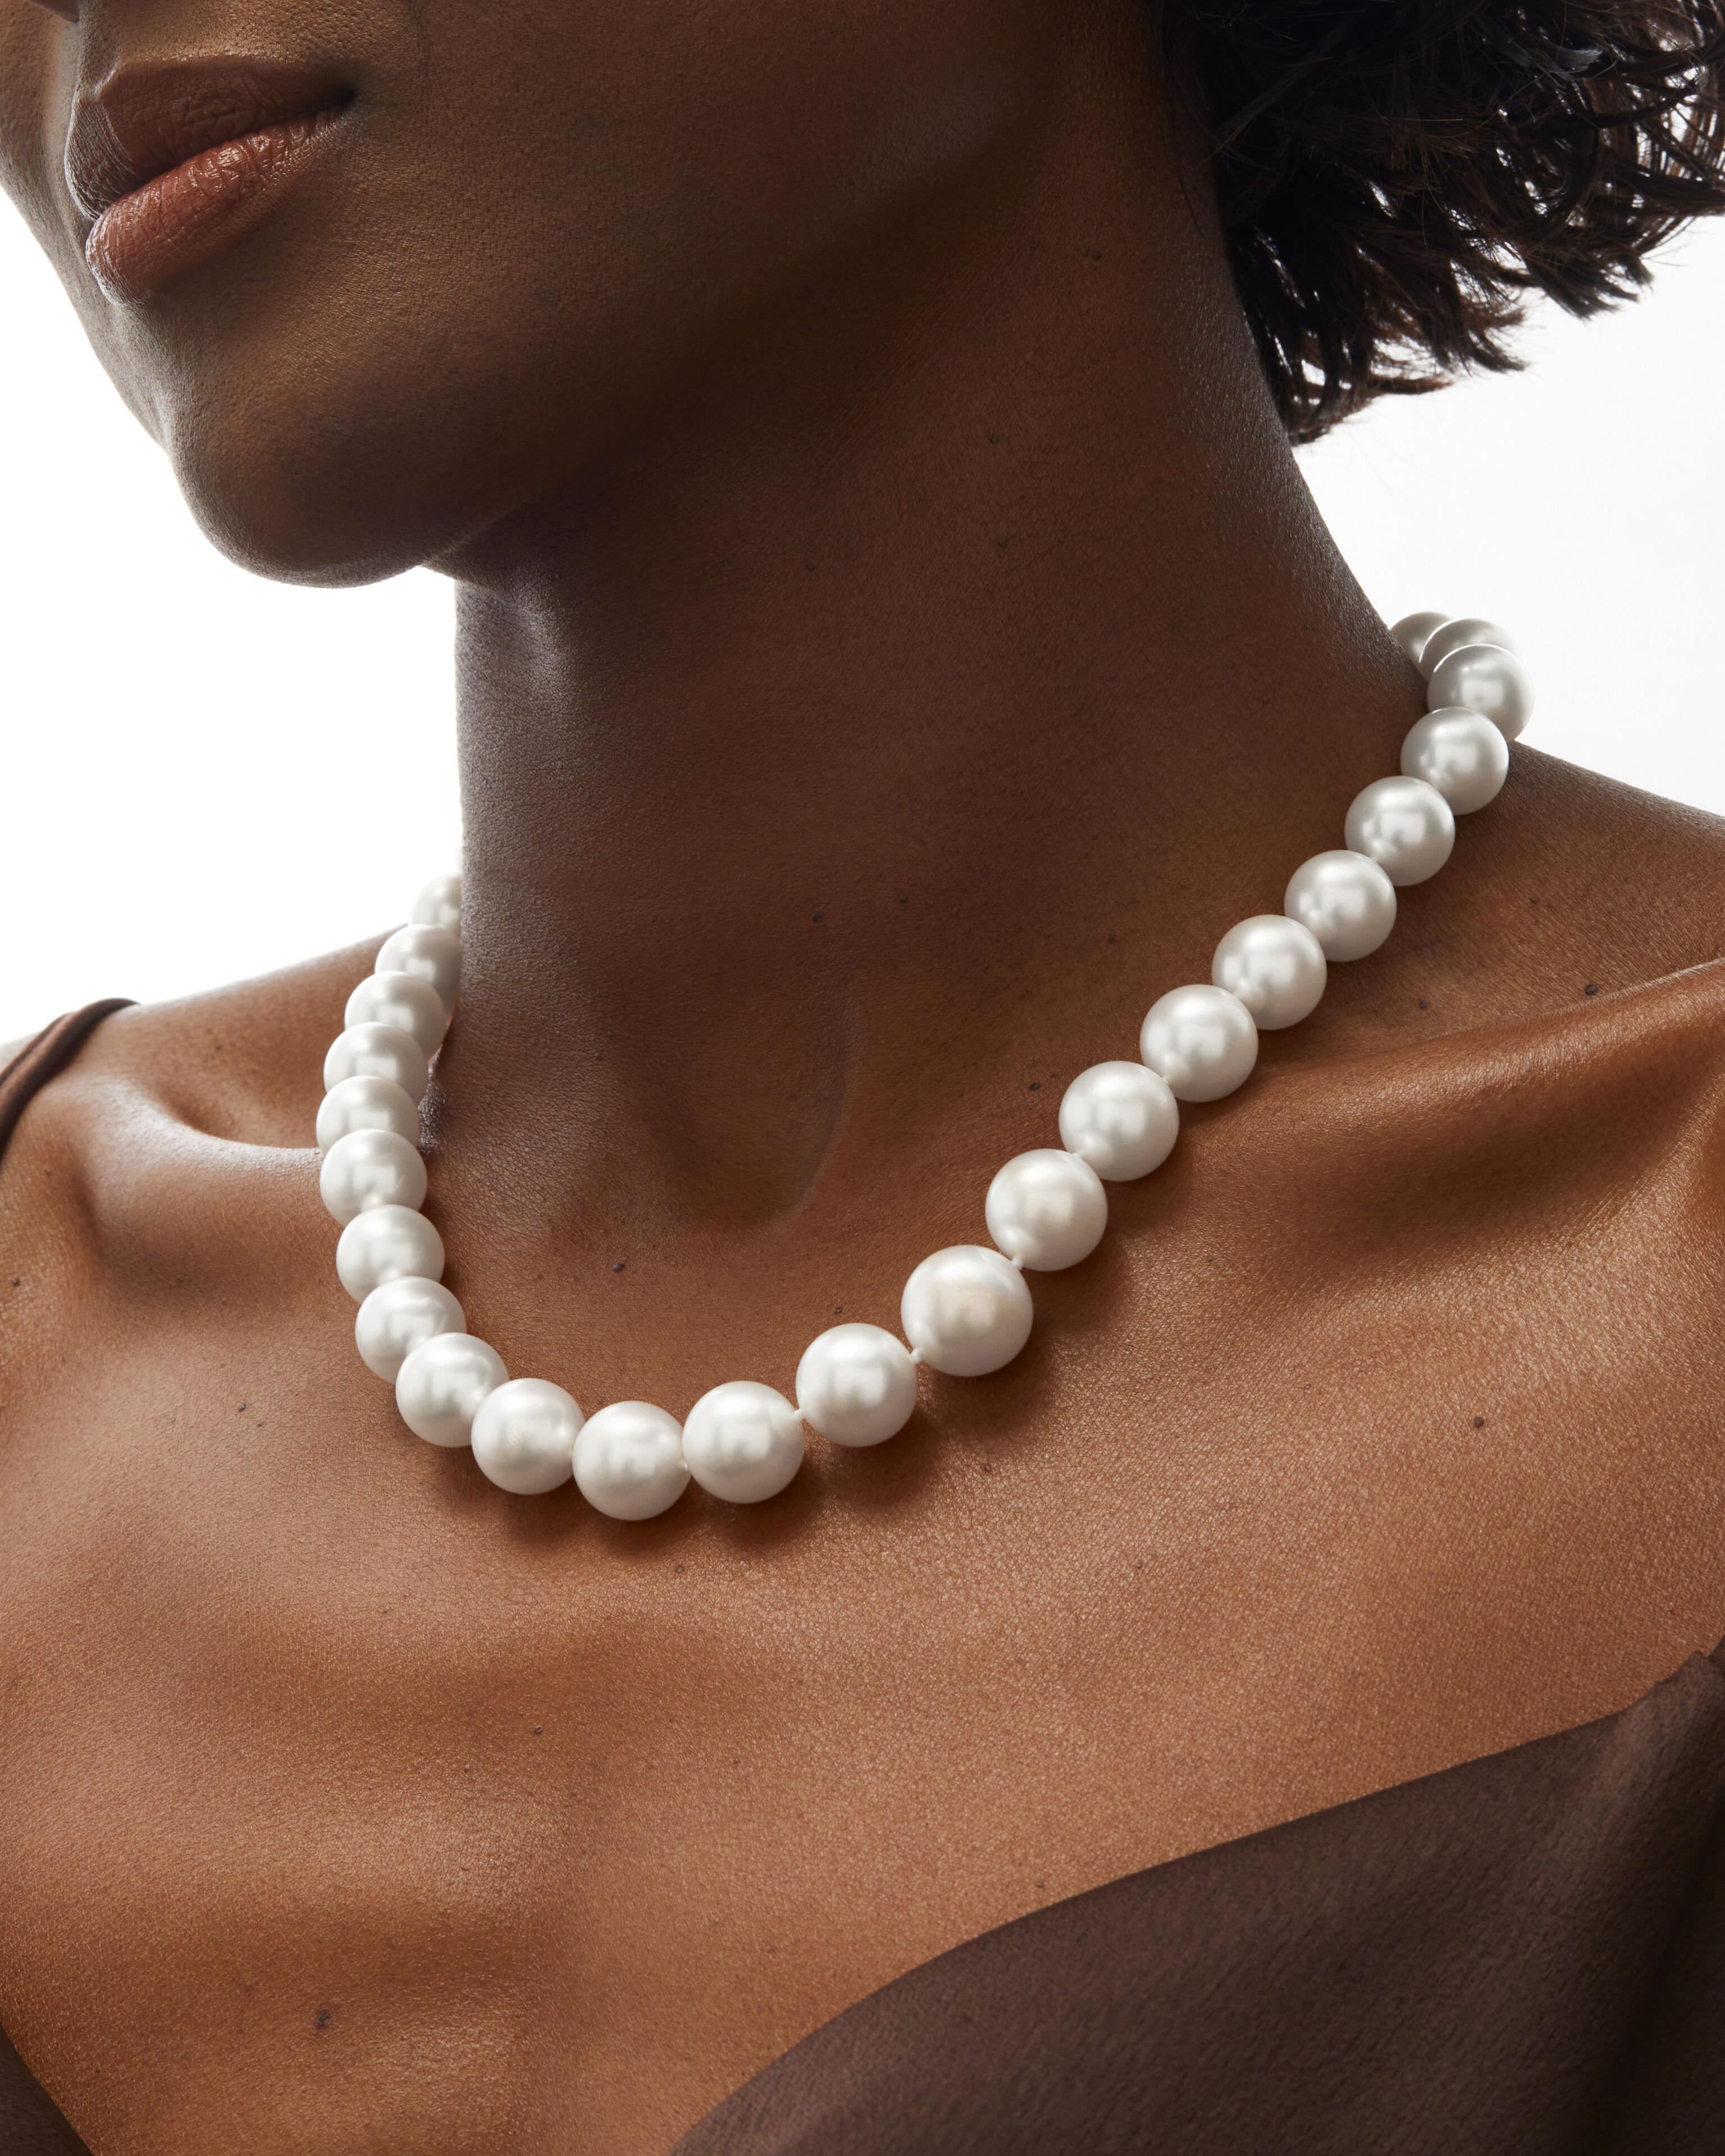 This beautiful Australian South Sea Pearl Strand has 33 White Round South Sea Pearls secured by the signature Roseate Unity clasp.  

The luminous South Sea pearls, sustainably harvested from the pristine waters off the coast of Australia, are